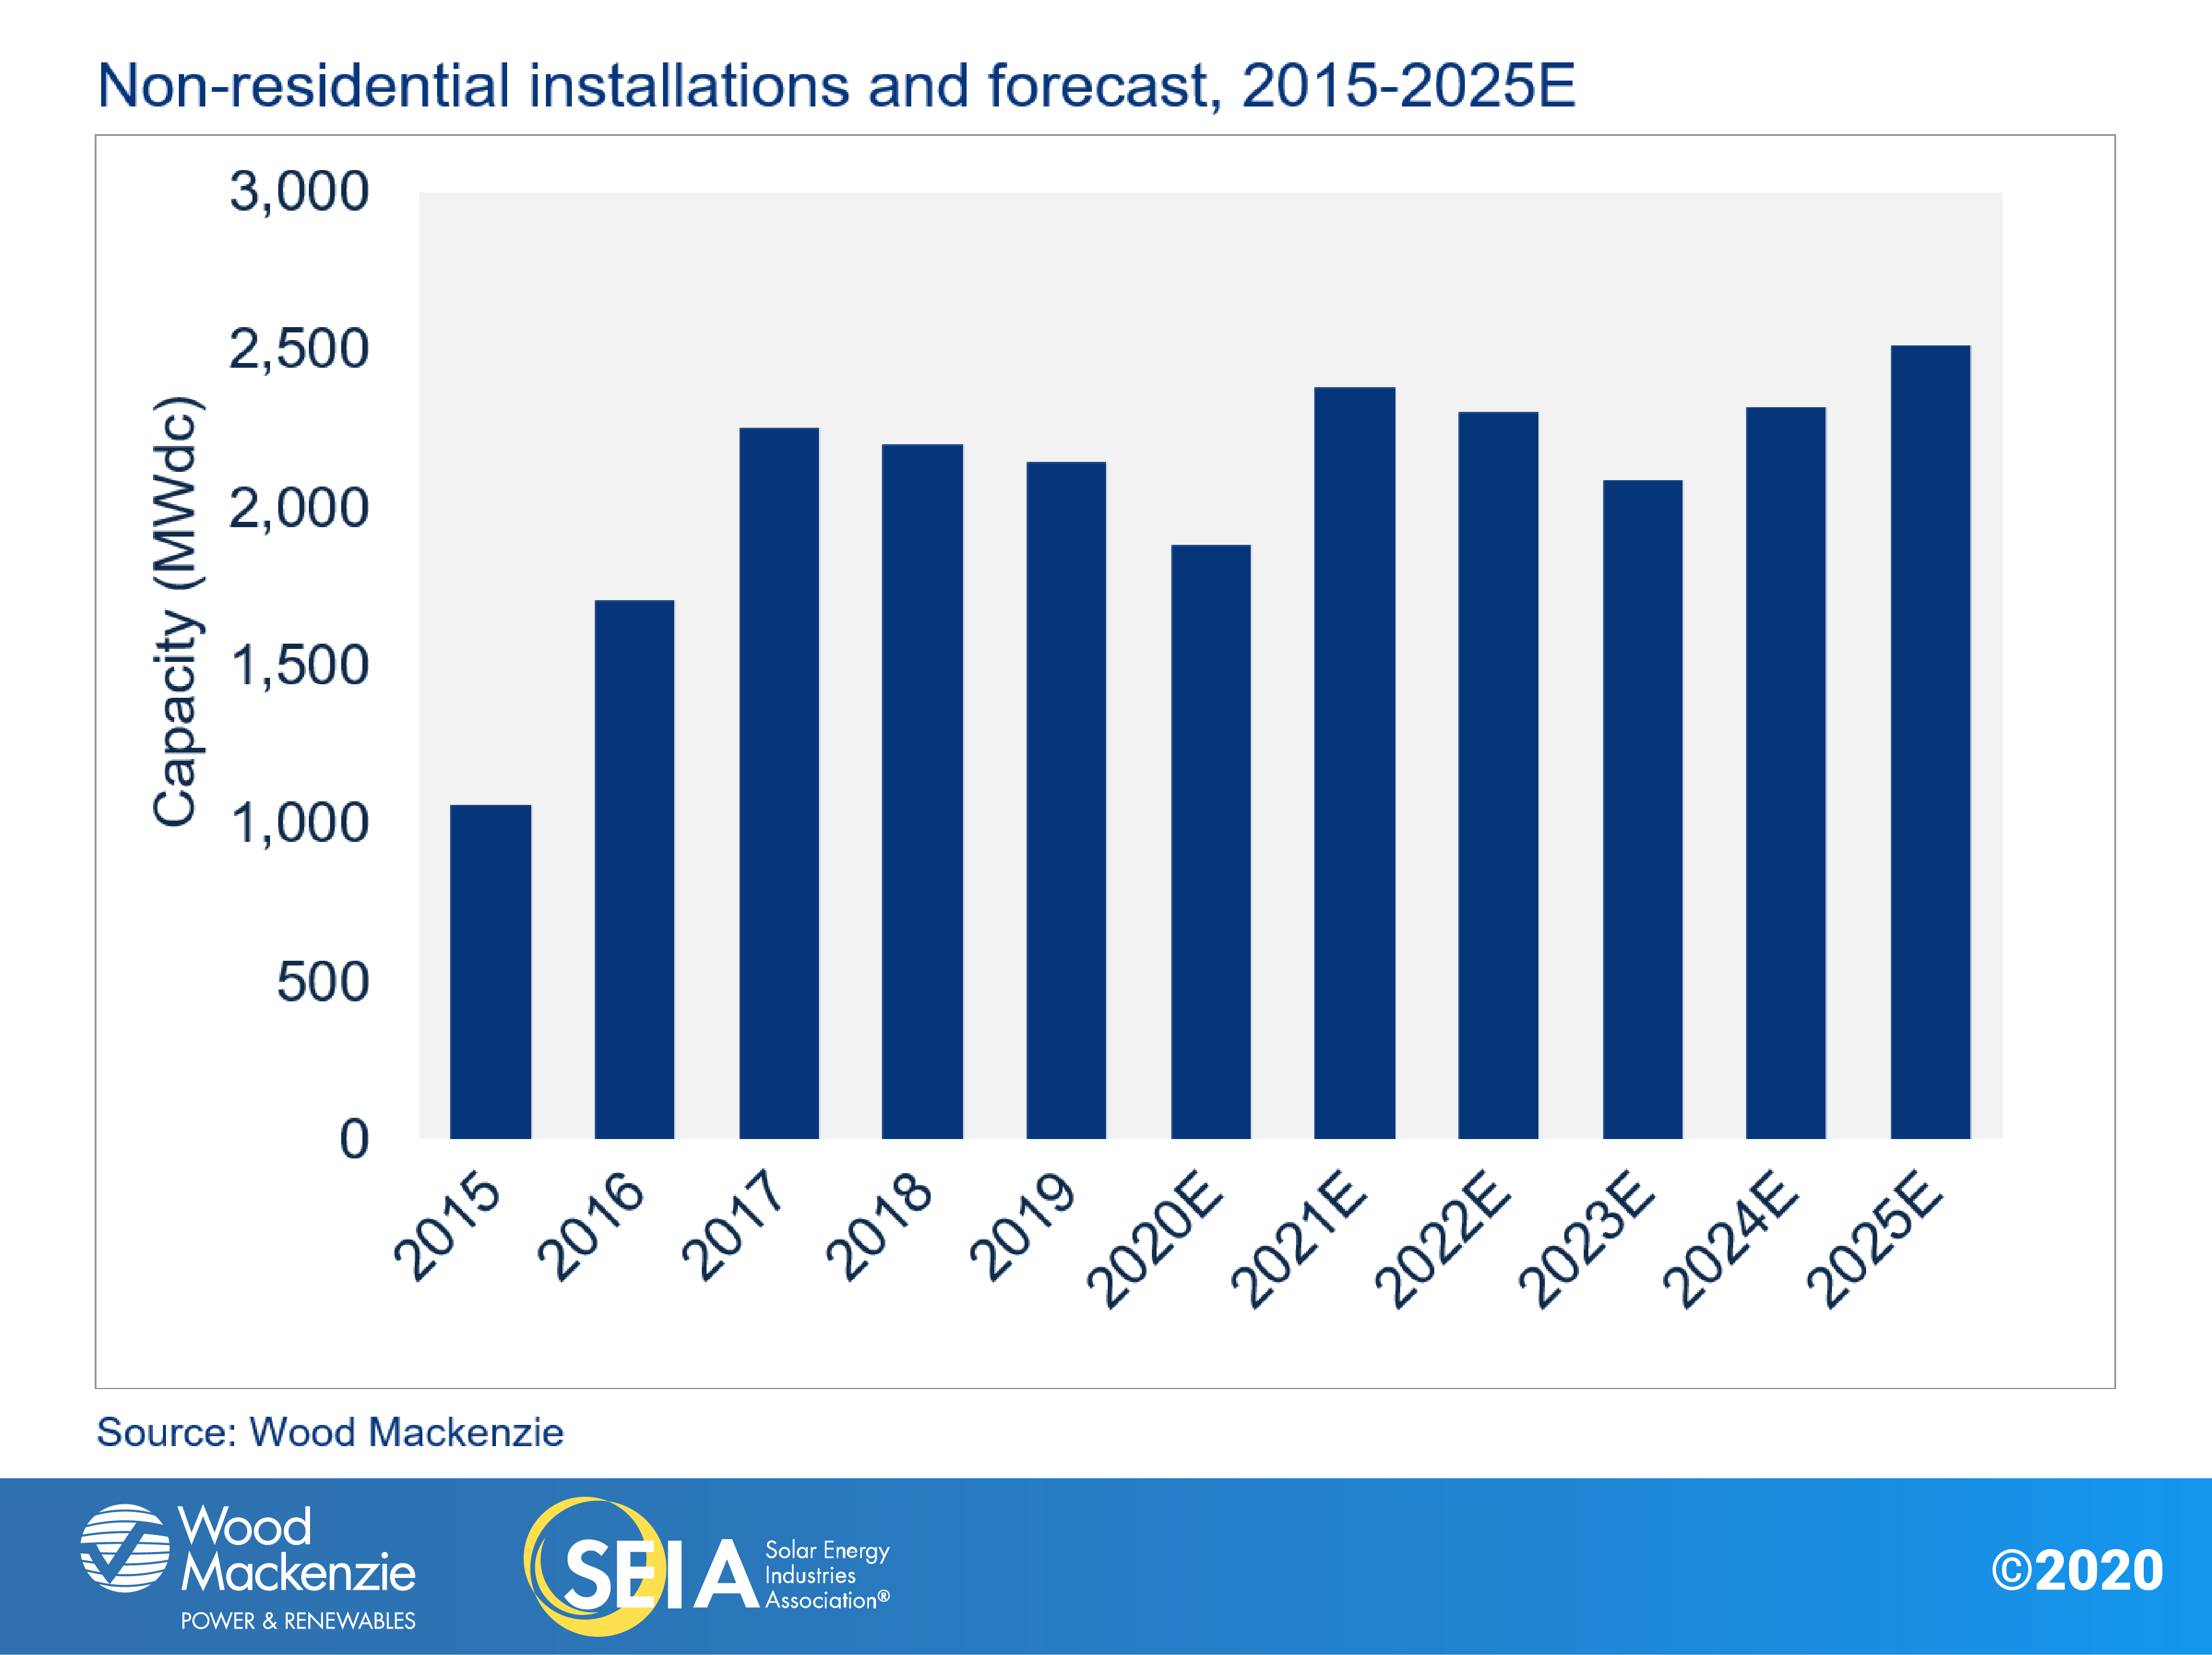 Non-residential installations and forecast chart